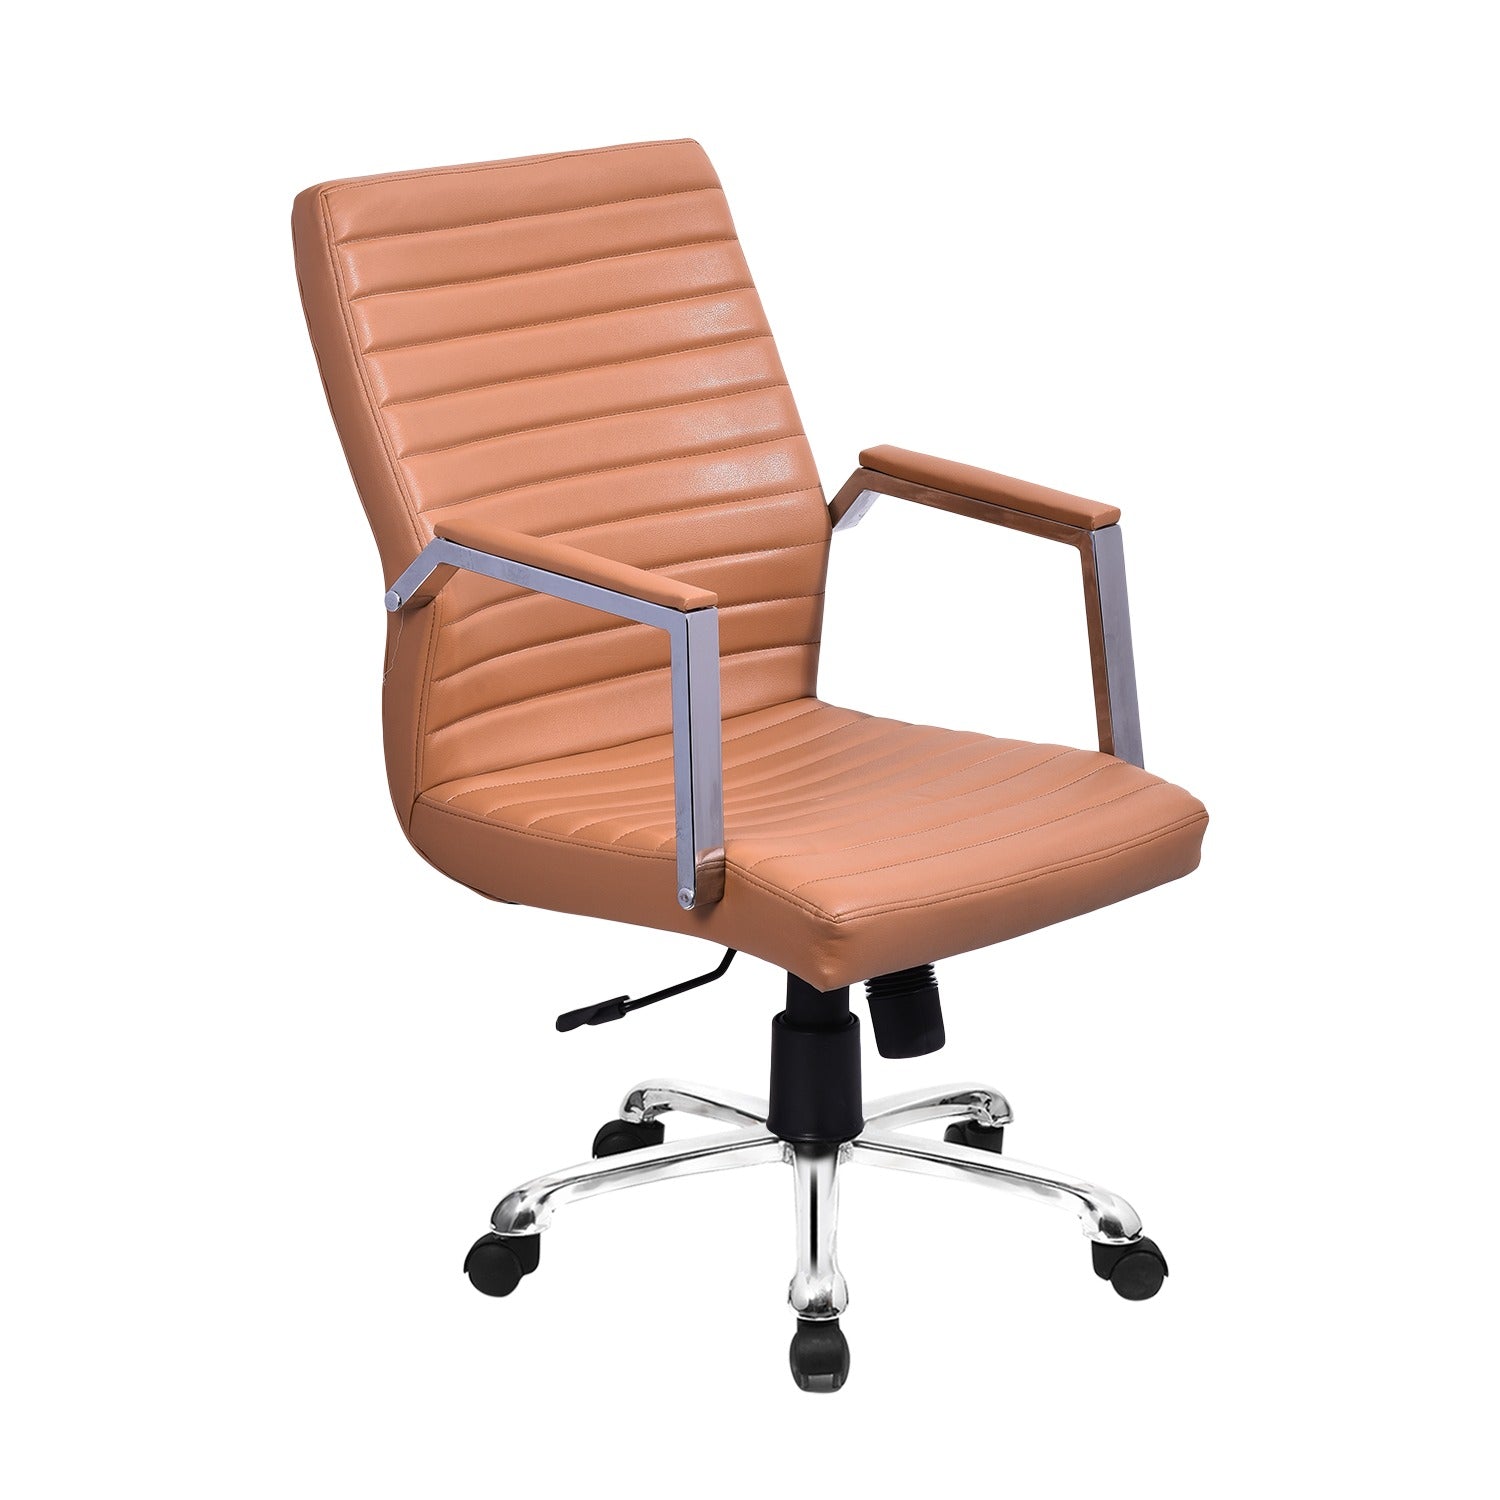 ZSE1041 Medium Back Chair by Zorin in Tan Color Zorin